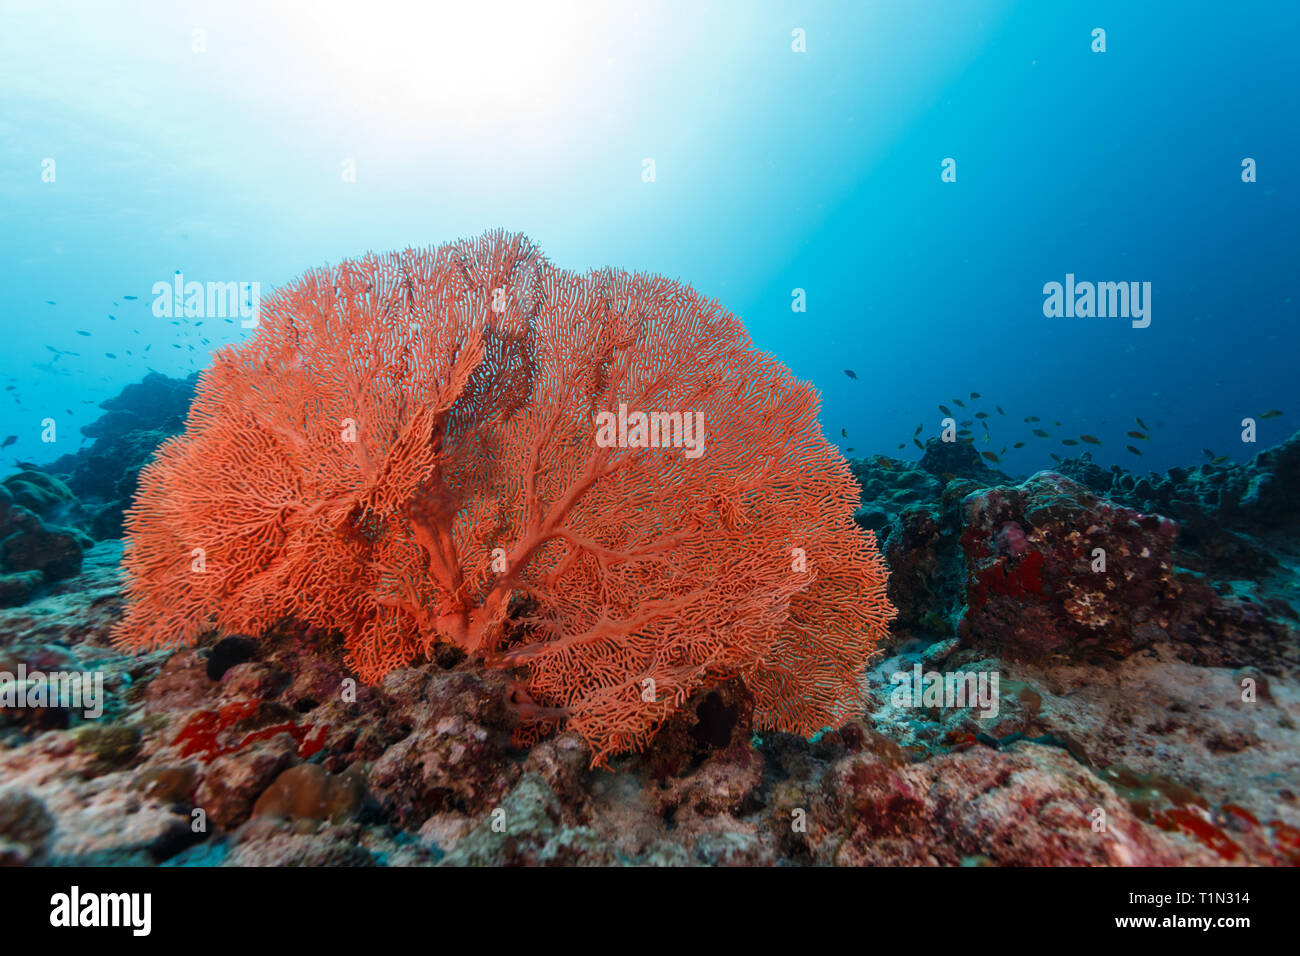 Closeup of gorgeous deep orange Gorgonian sea fan on reef filled with colorful varieties of sponges and corals Stock Photo